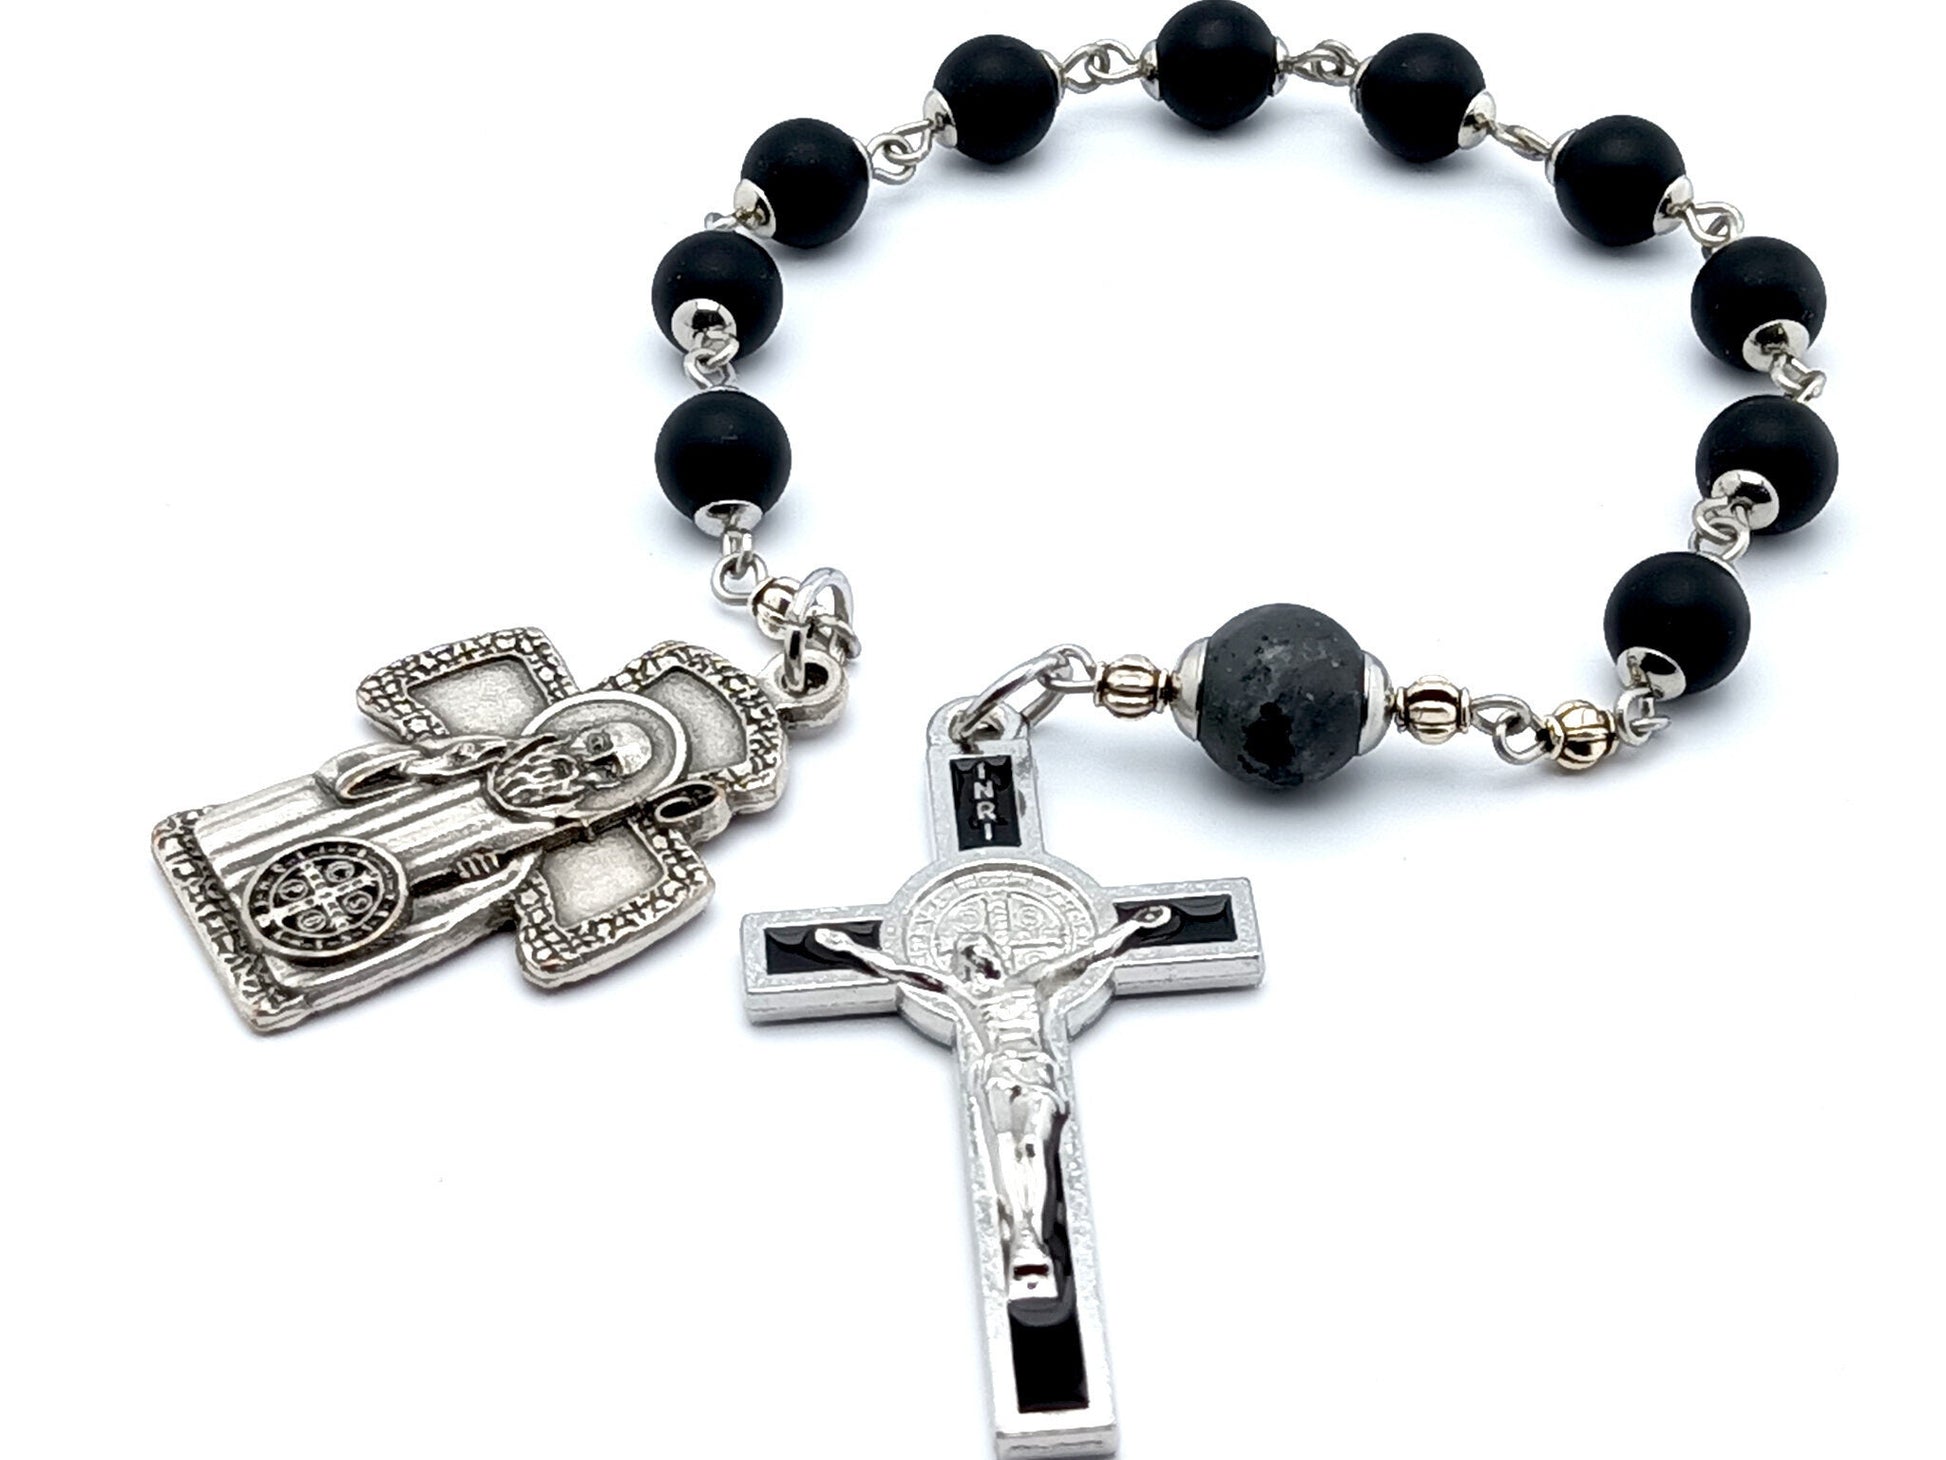 Saint Benedict unique rosary beads single decade rosary with onyx gemstone beads. Silver and black enamel crucifix and end medal.